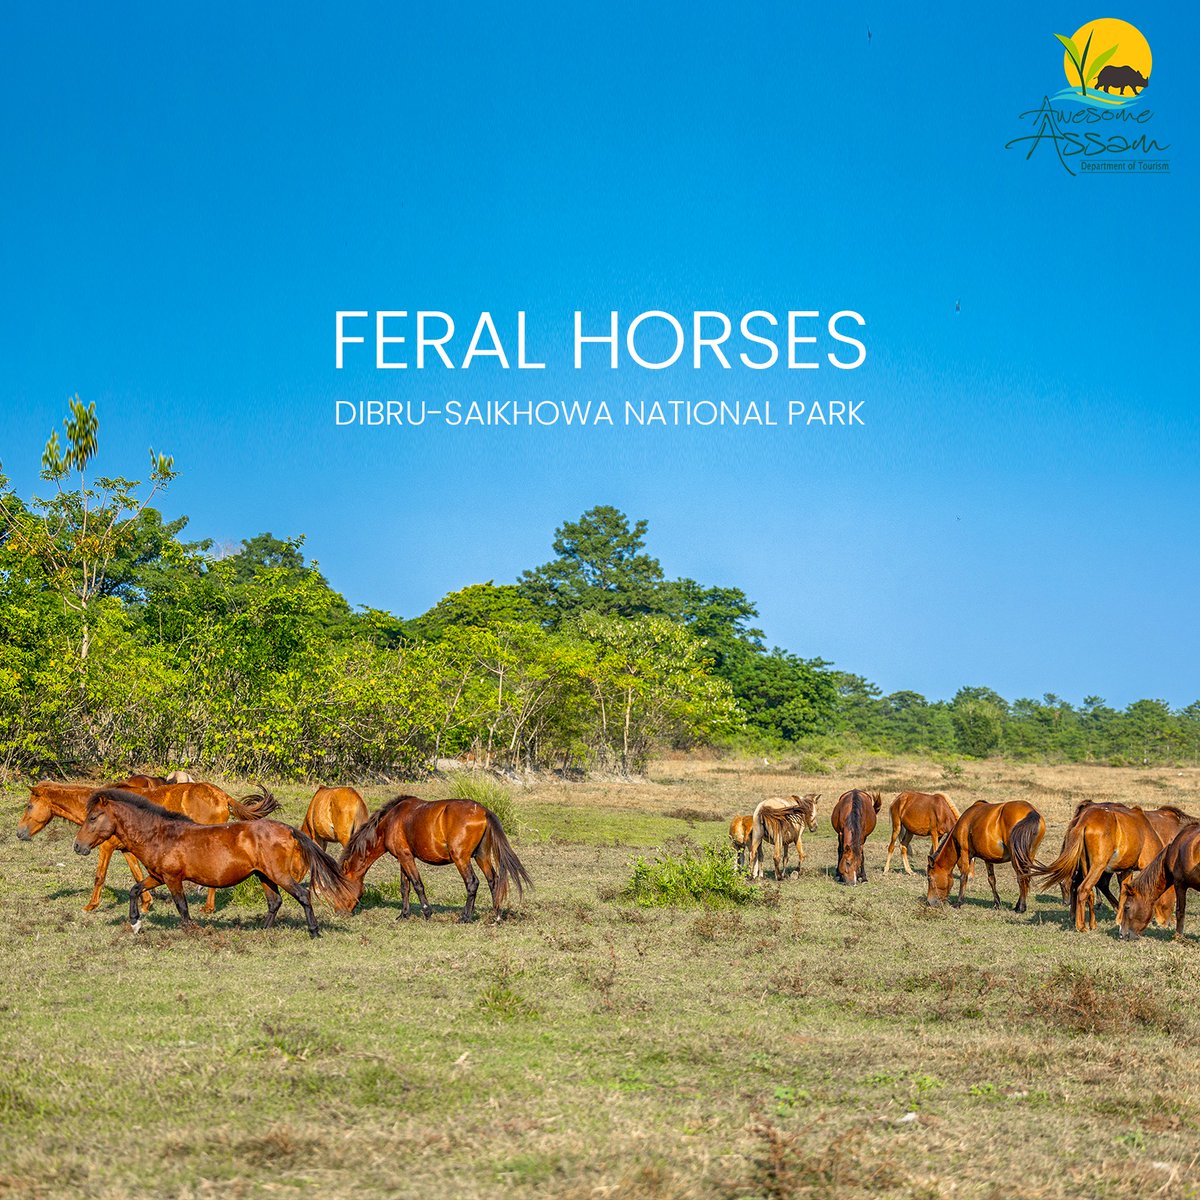 Feral horses are domestic horses that strayed into wilderness and became inhabitants of the jungle over the years. Feral horses are found in Dibru SaikhowaNational Park. #AwesomeAssam #AssamTourism #FeralHorses #DibruSaikhowaNationalPark #WildLife #Nature #NaturalGeography…